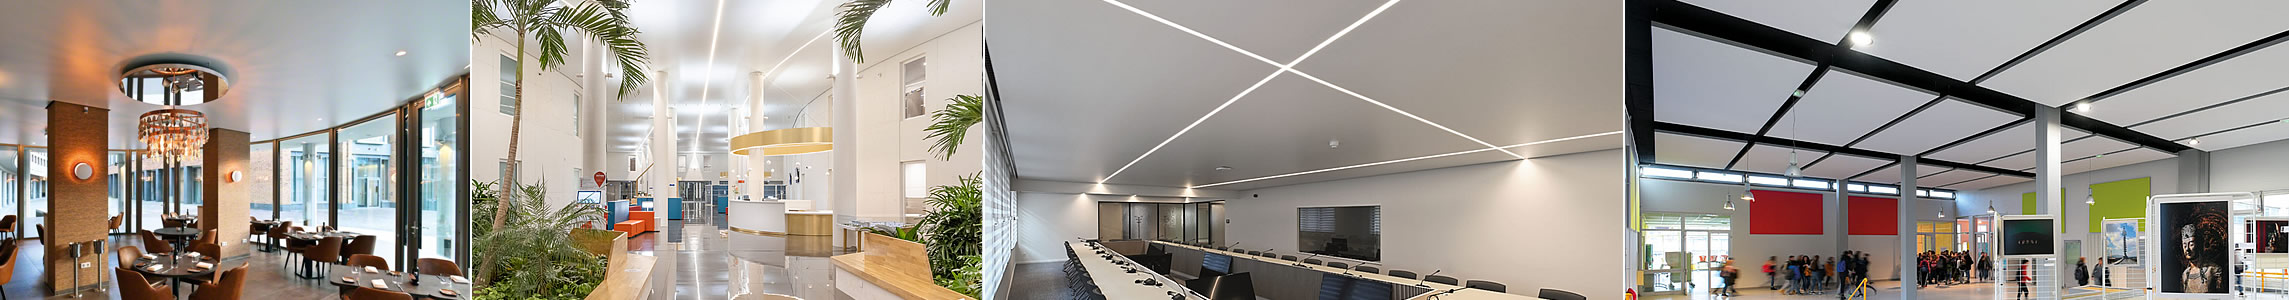 Applications of the Barrisol Clim® ceiling